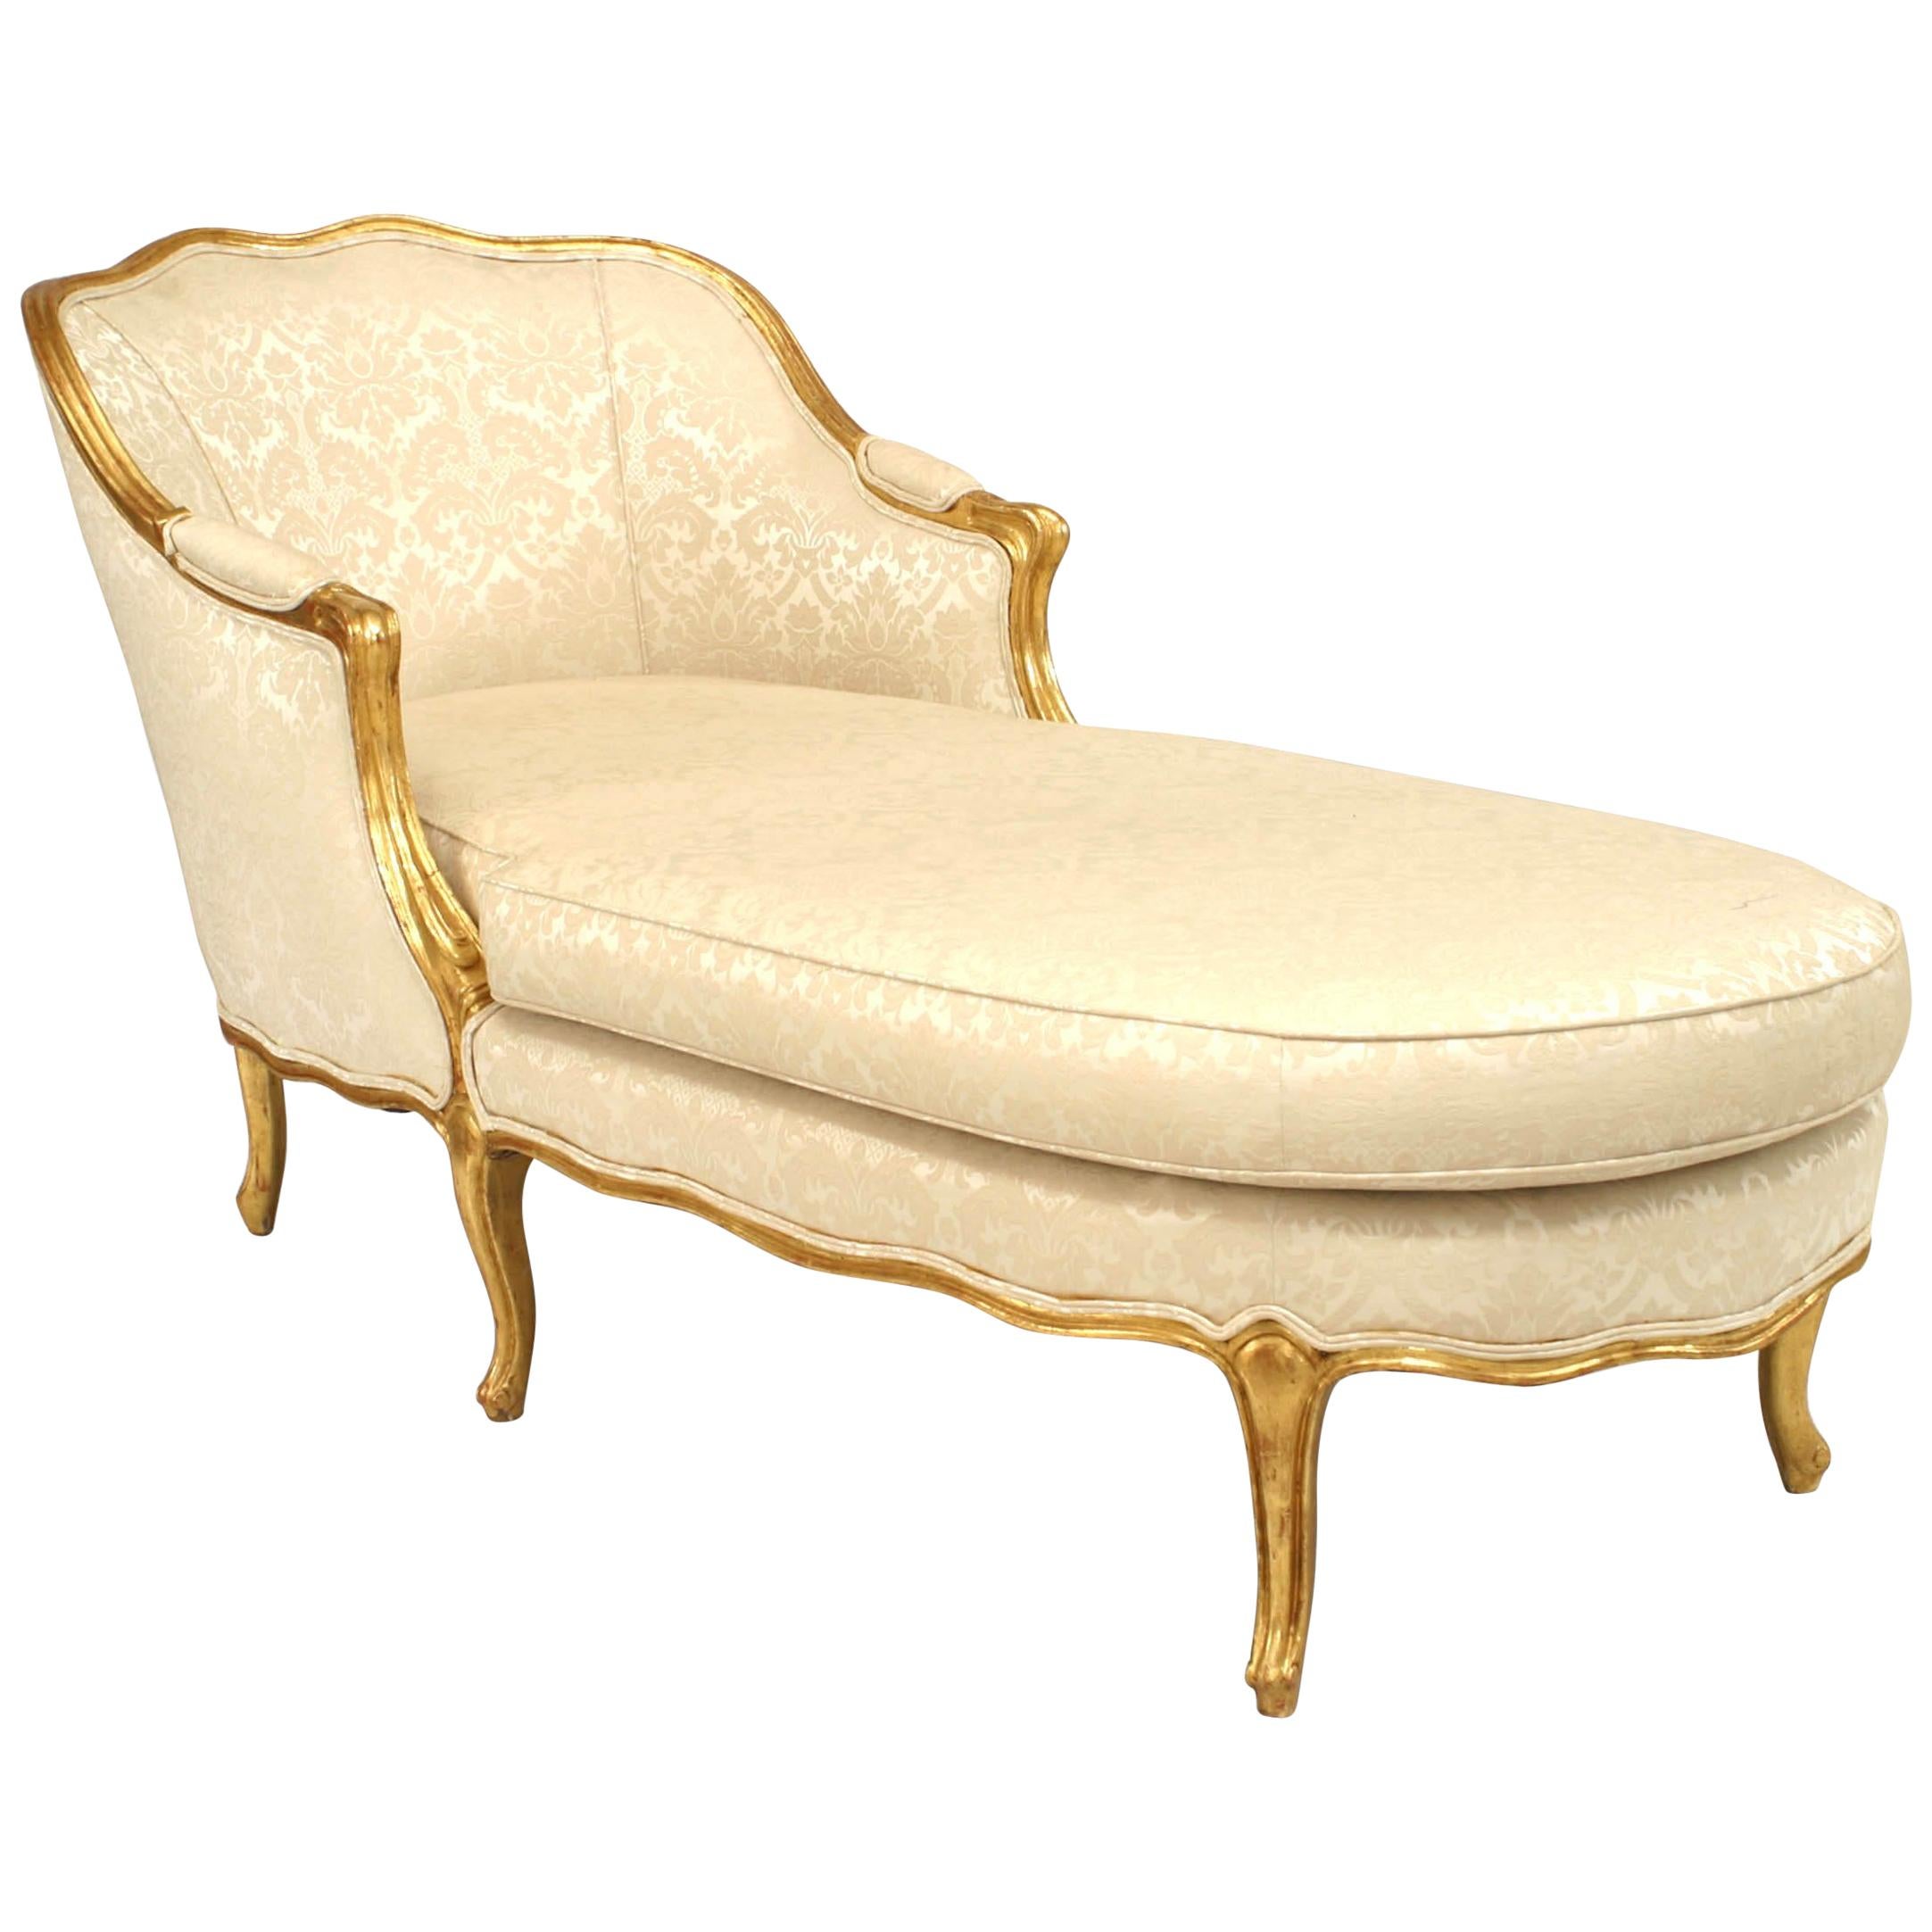 French Louis XV Style '19th-20th Century' Gilt Chaise Longue